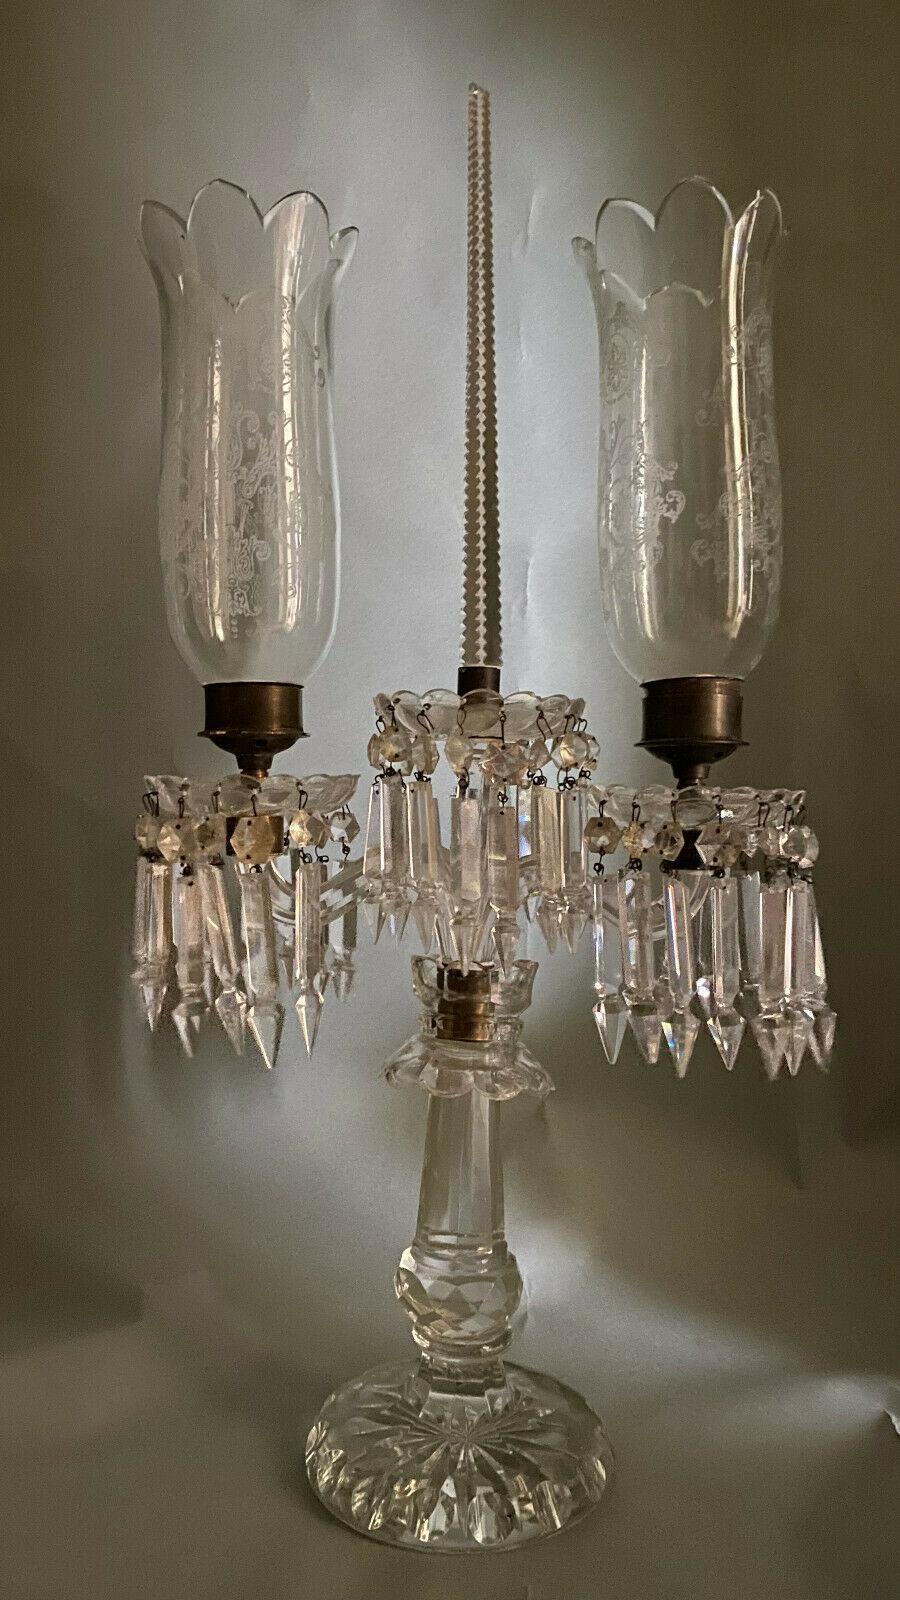 19thc French Napoleon III Cut Crystal Candelabra attributed to Baccarat  For Sale 1